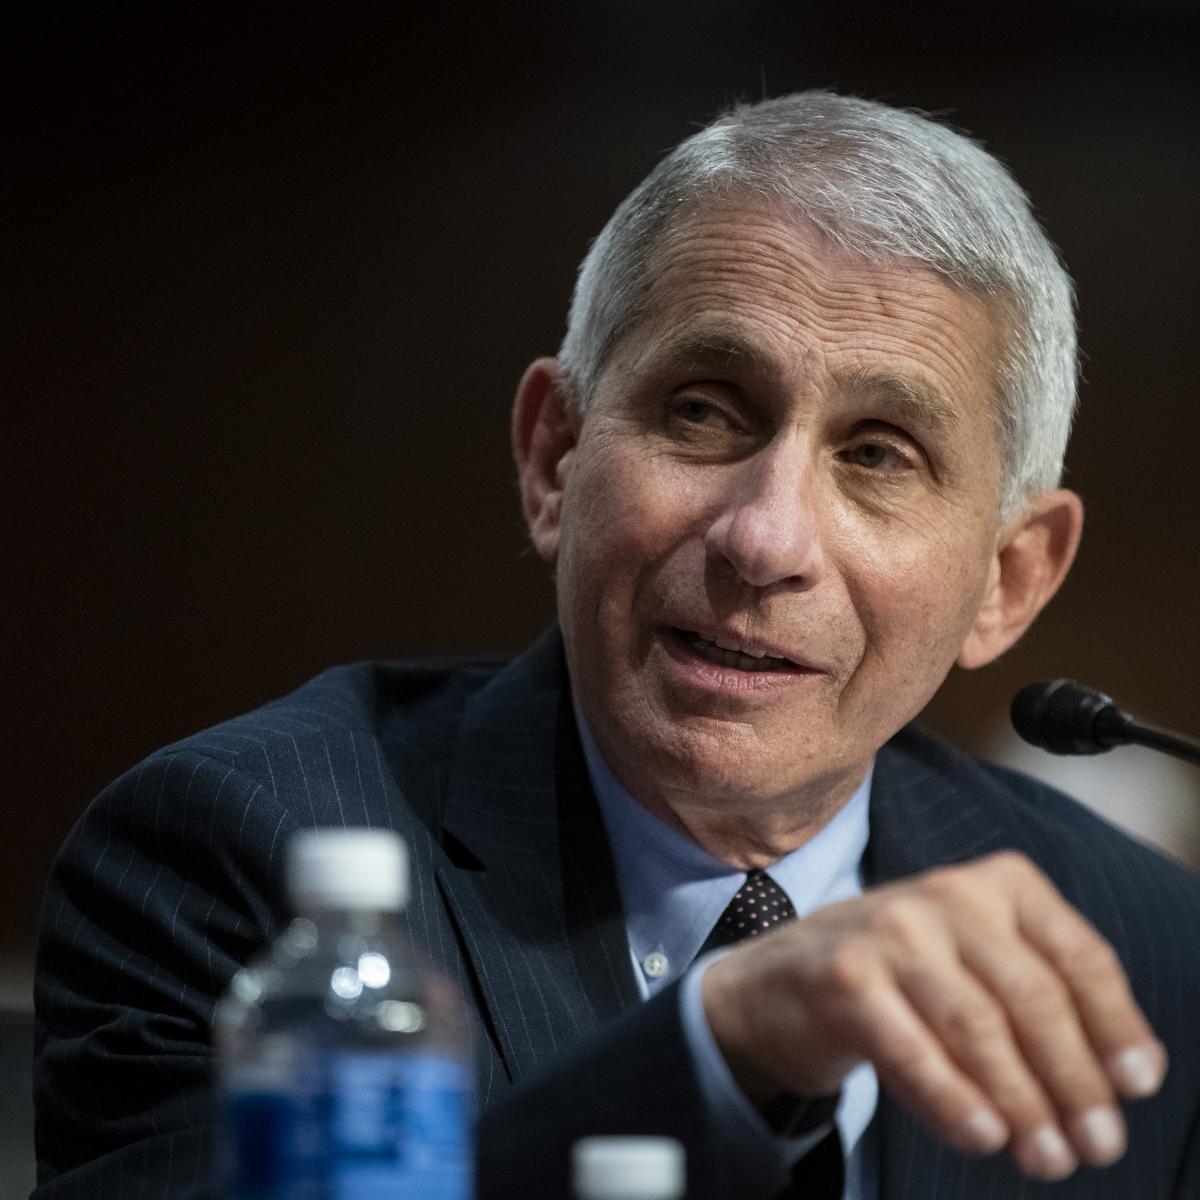 Dr. Anthony Fauci to Throw Out 1st Pitch at Yankees vs. Nationals Season Opener thumbnail